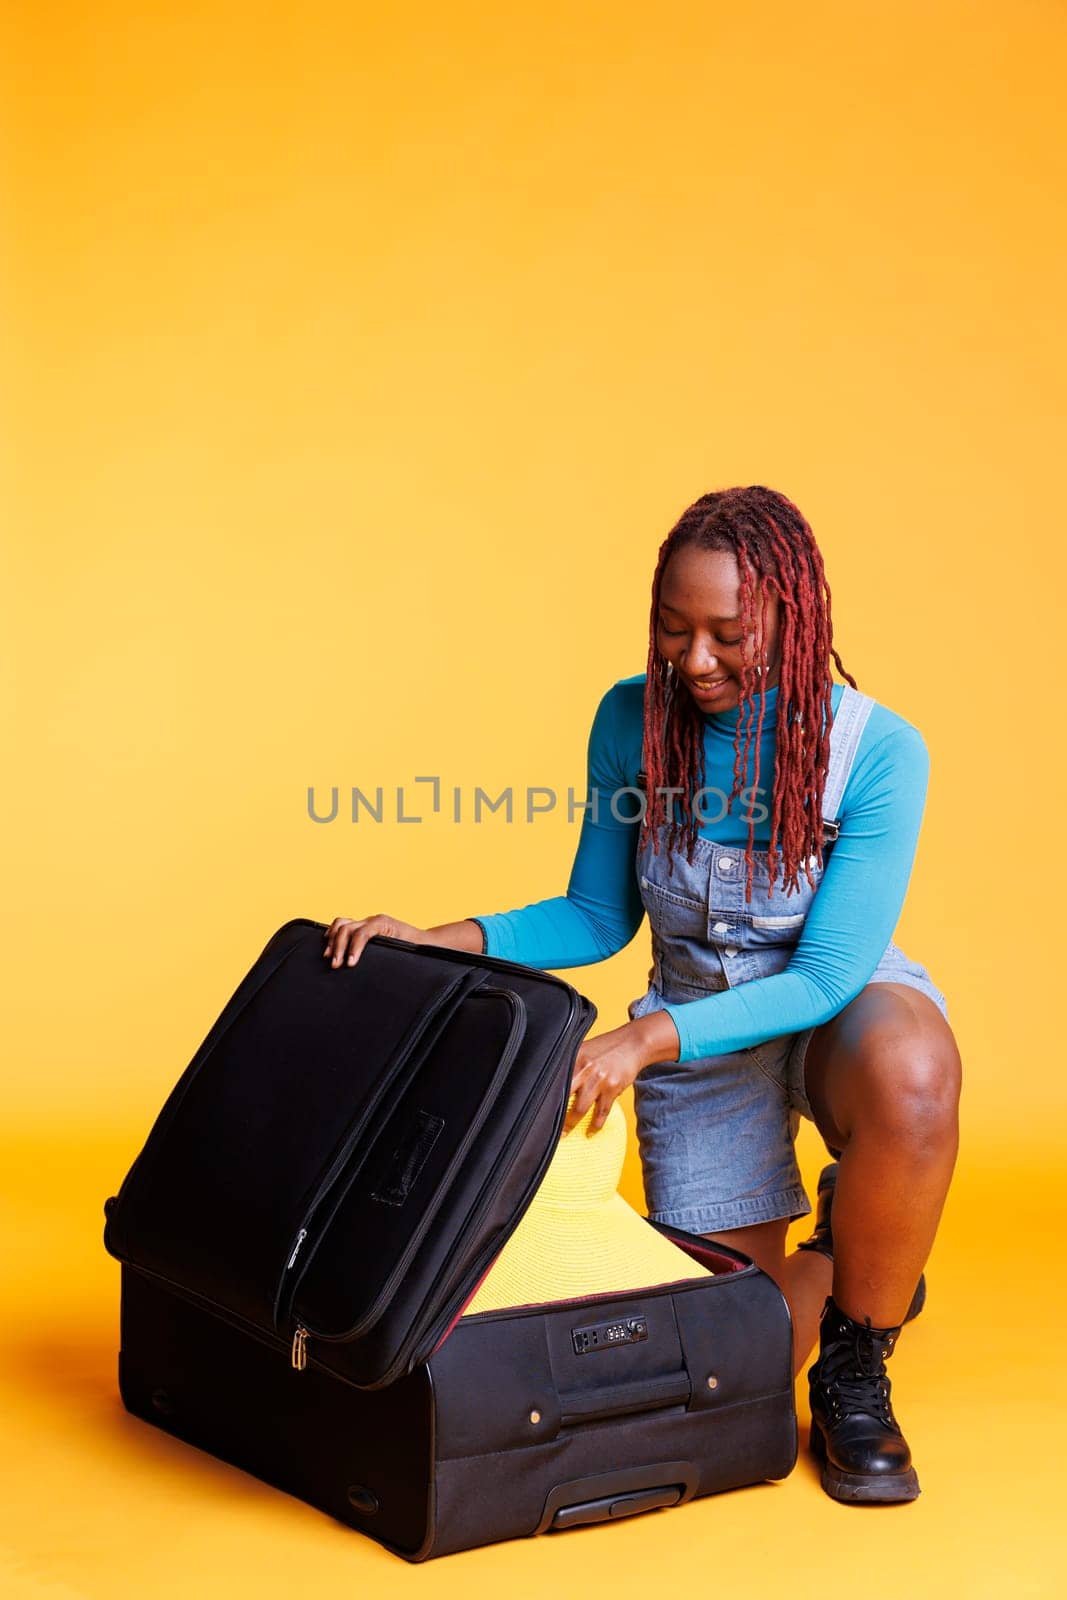 Female tourist packing bags for vacation, putting essentials and items in trolley bag before leaving on holiday trip. Young woman feeling excited about travelling, pack clothes.